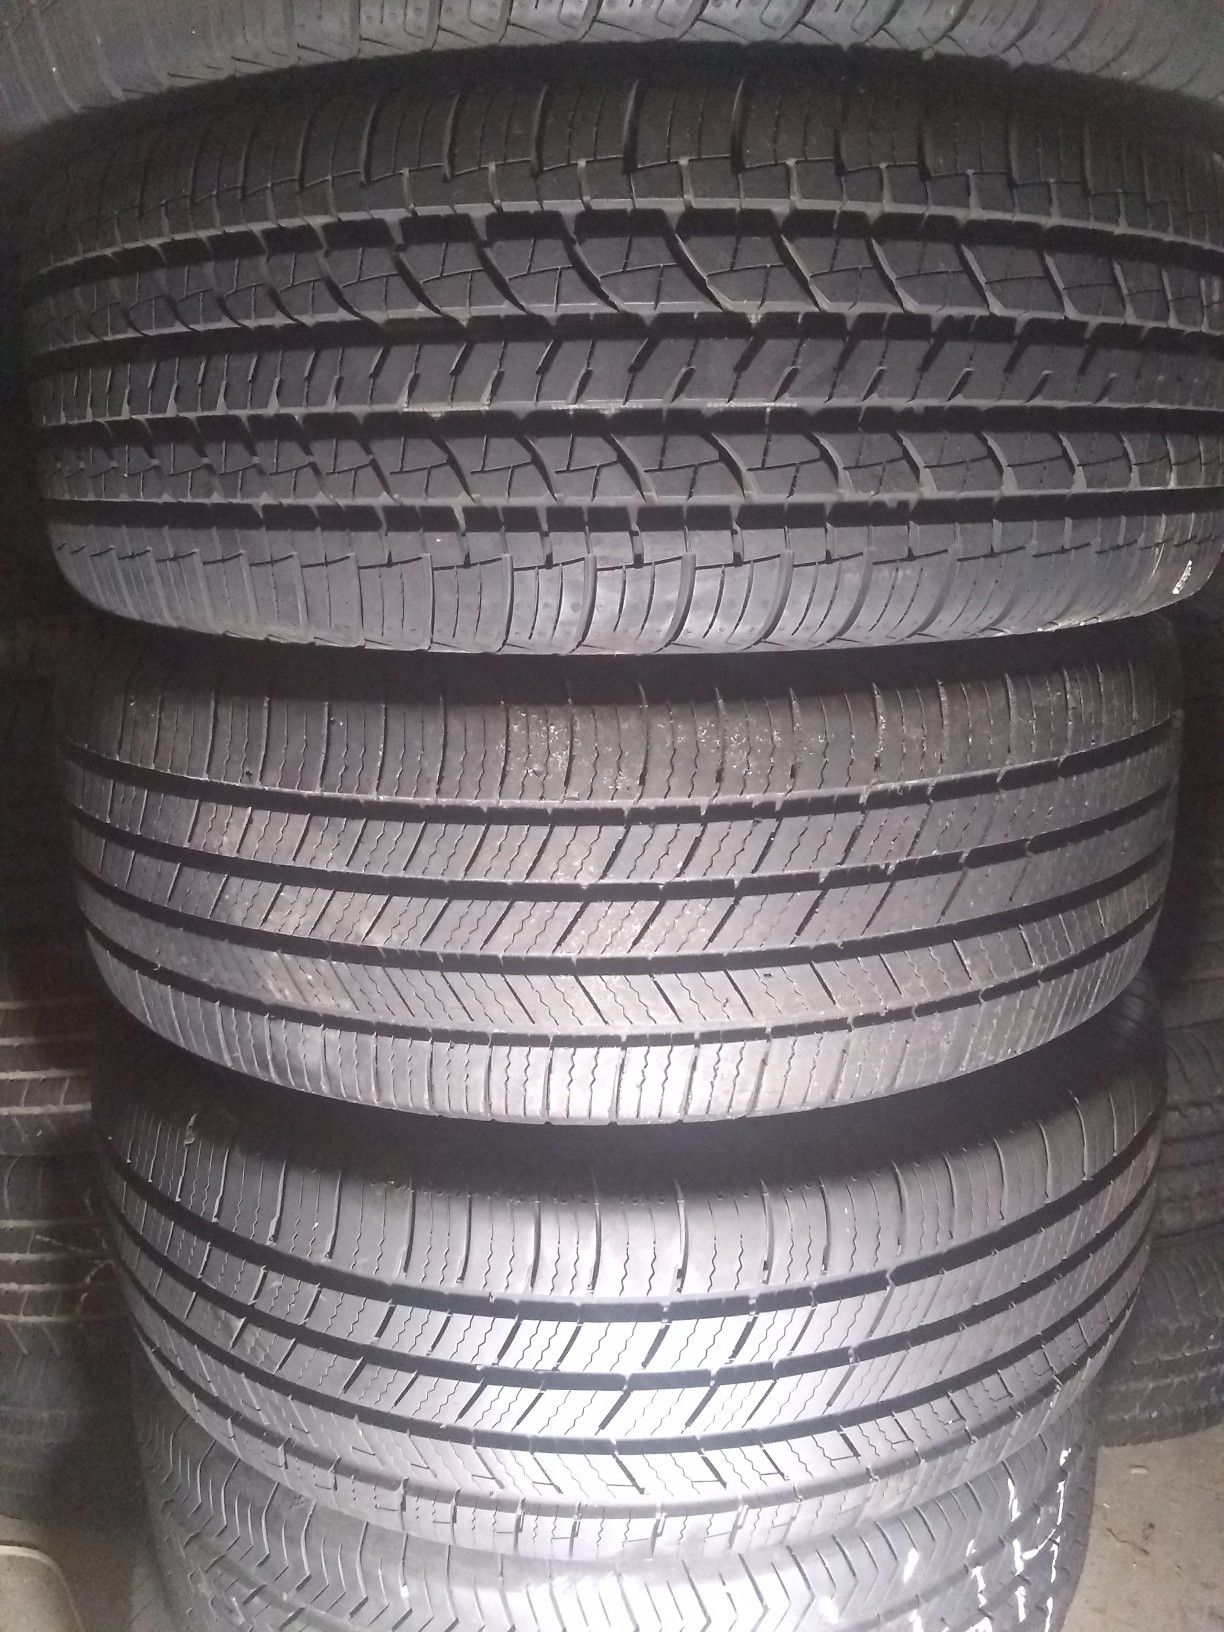 All sizes high tread used tires